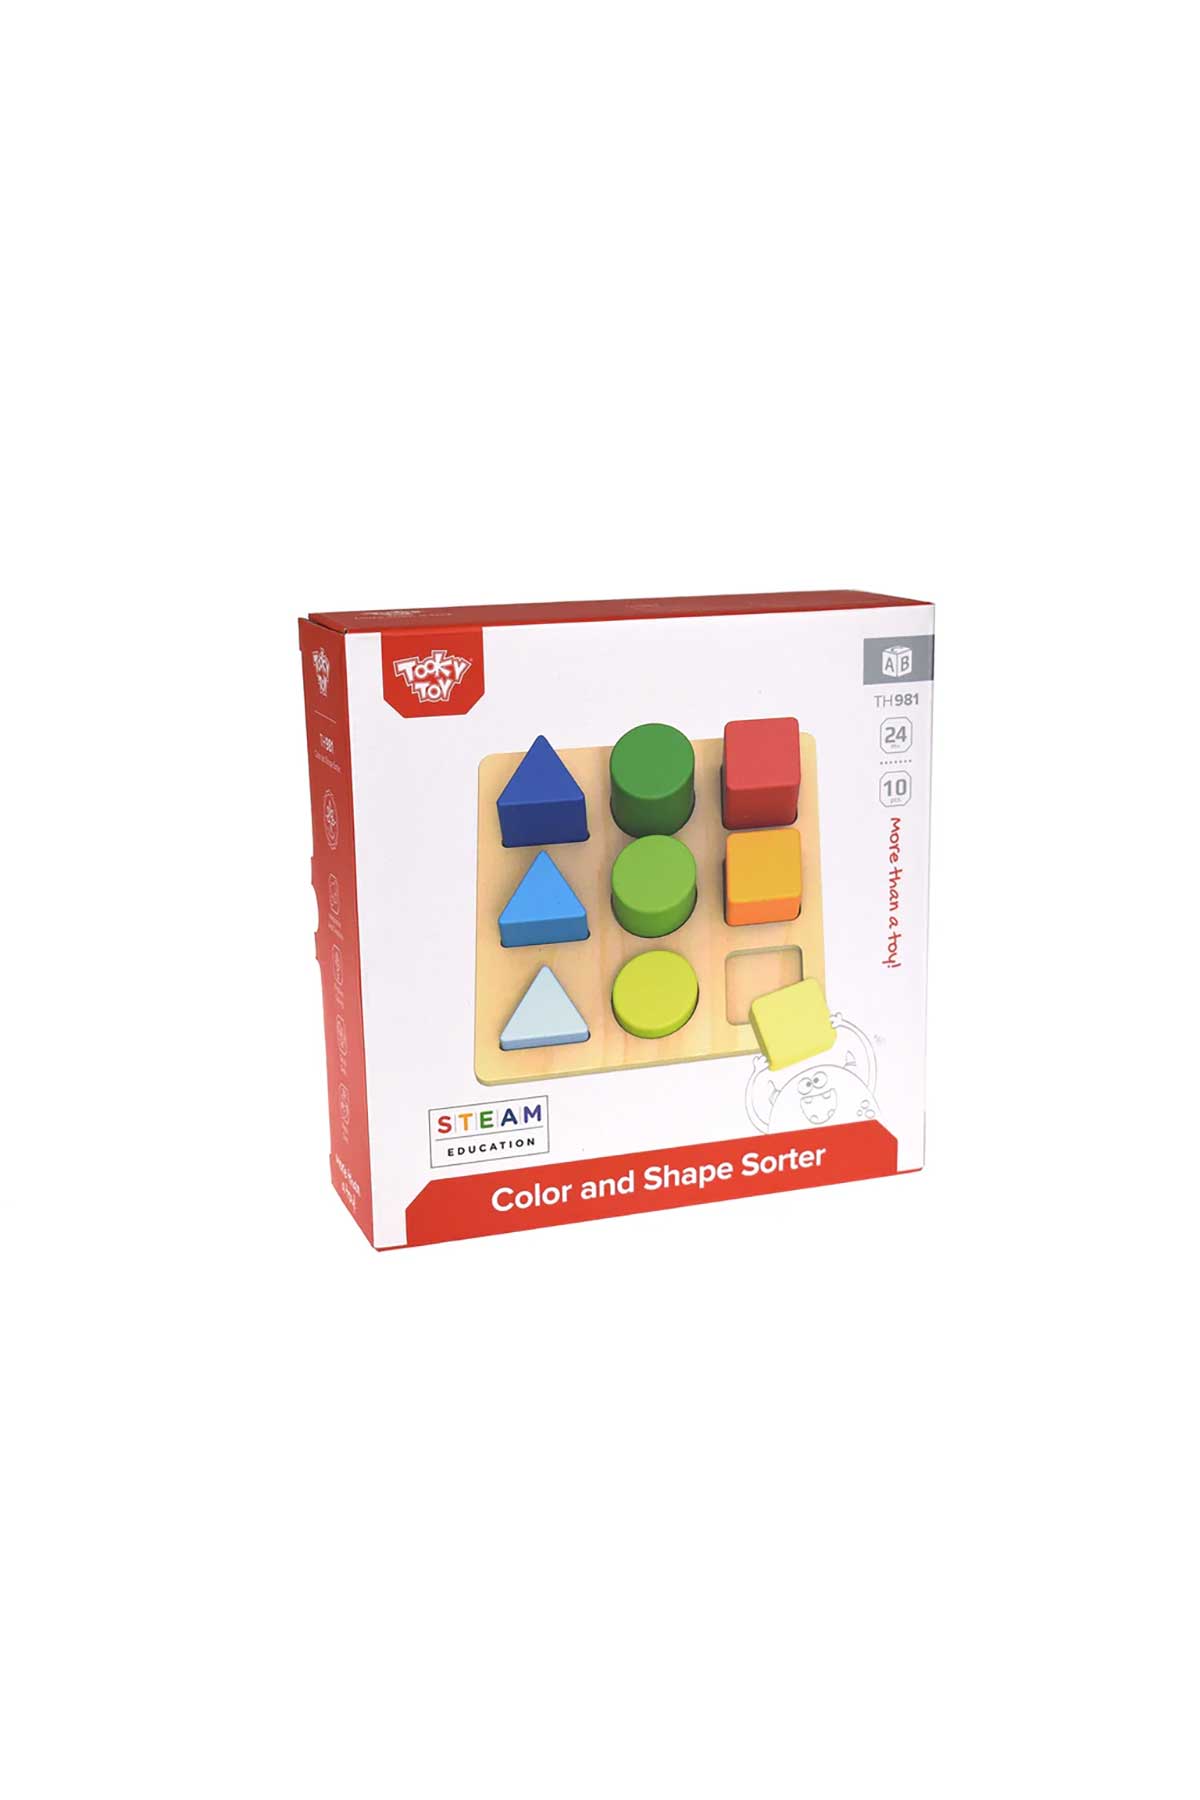 Colour and Shape Sorter